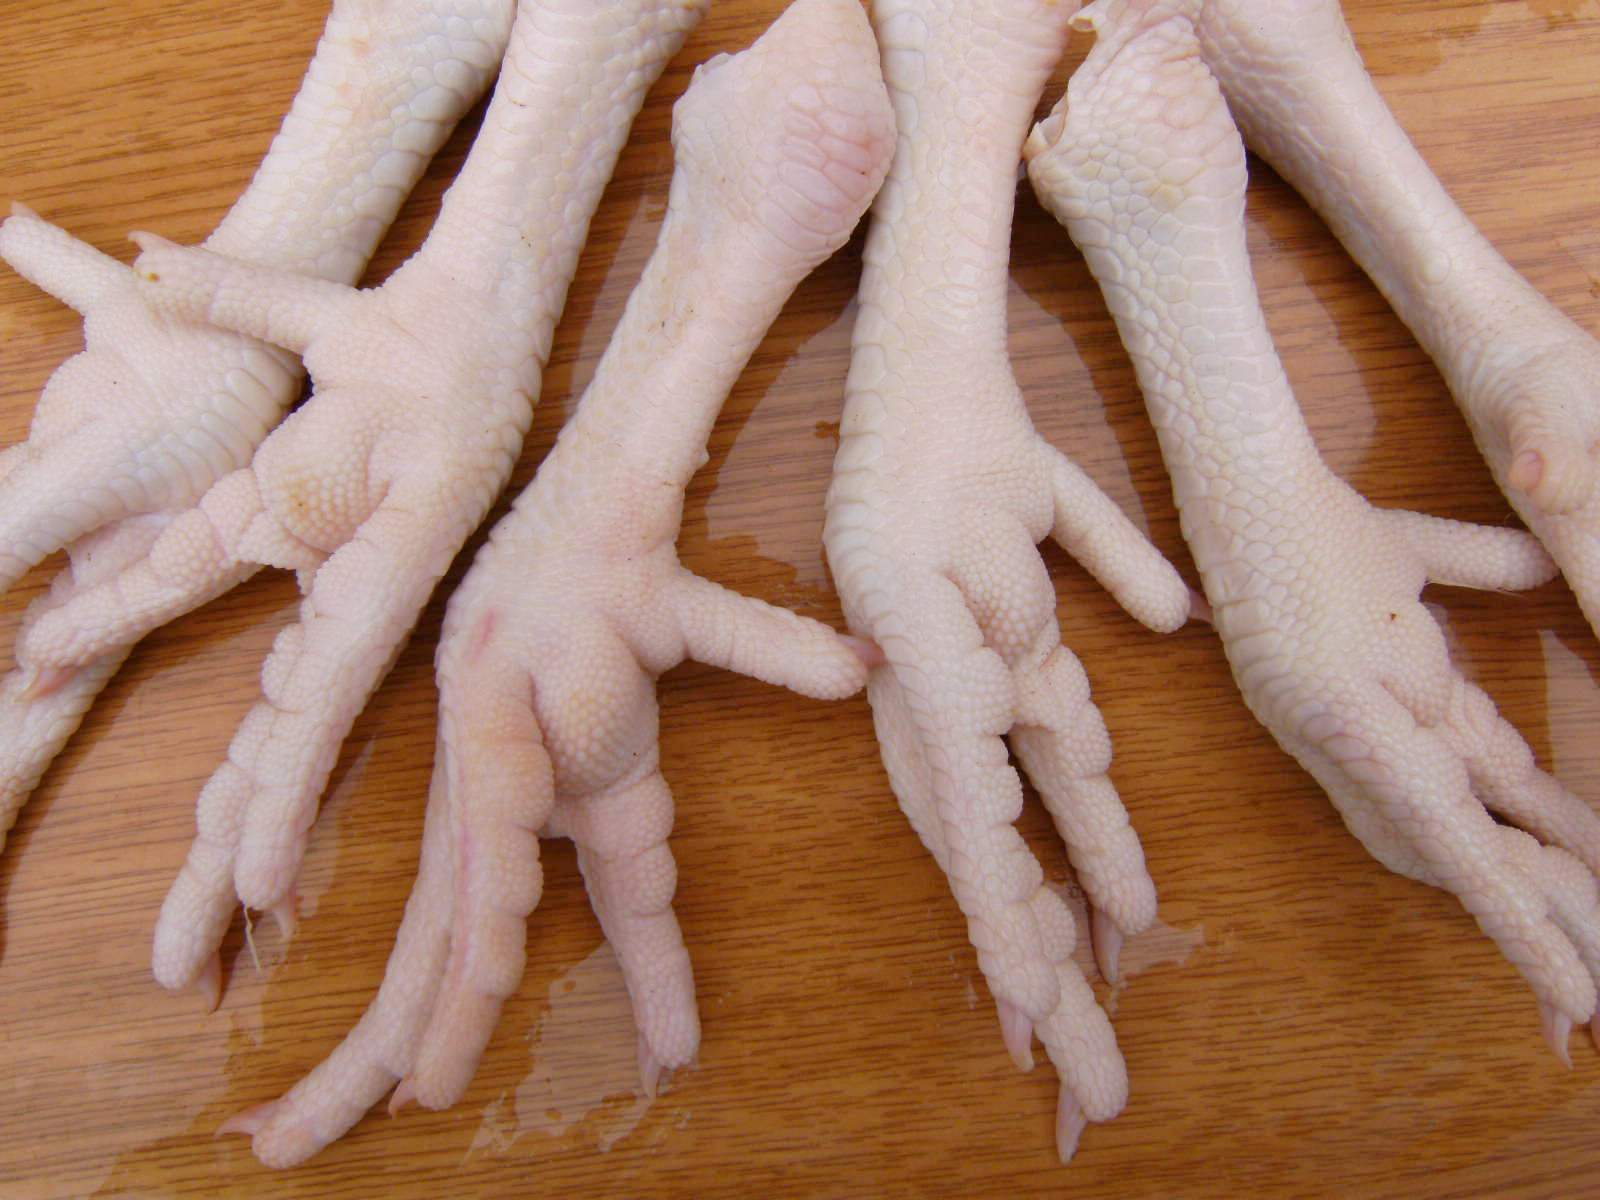 Grade A Frozen Chicken Feet, Paws and Other Parts Available